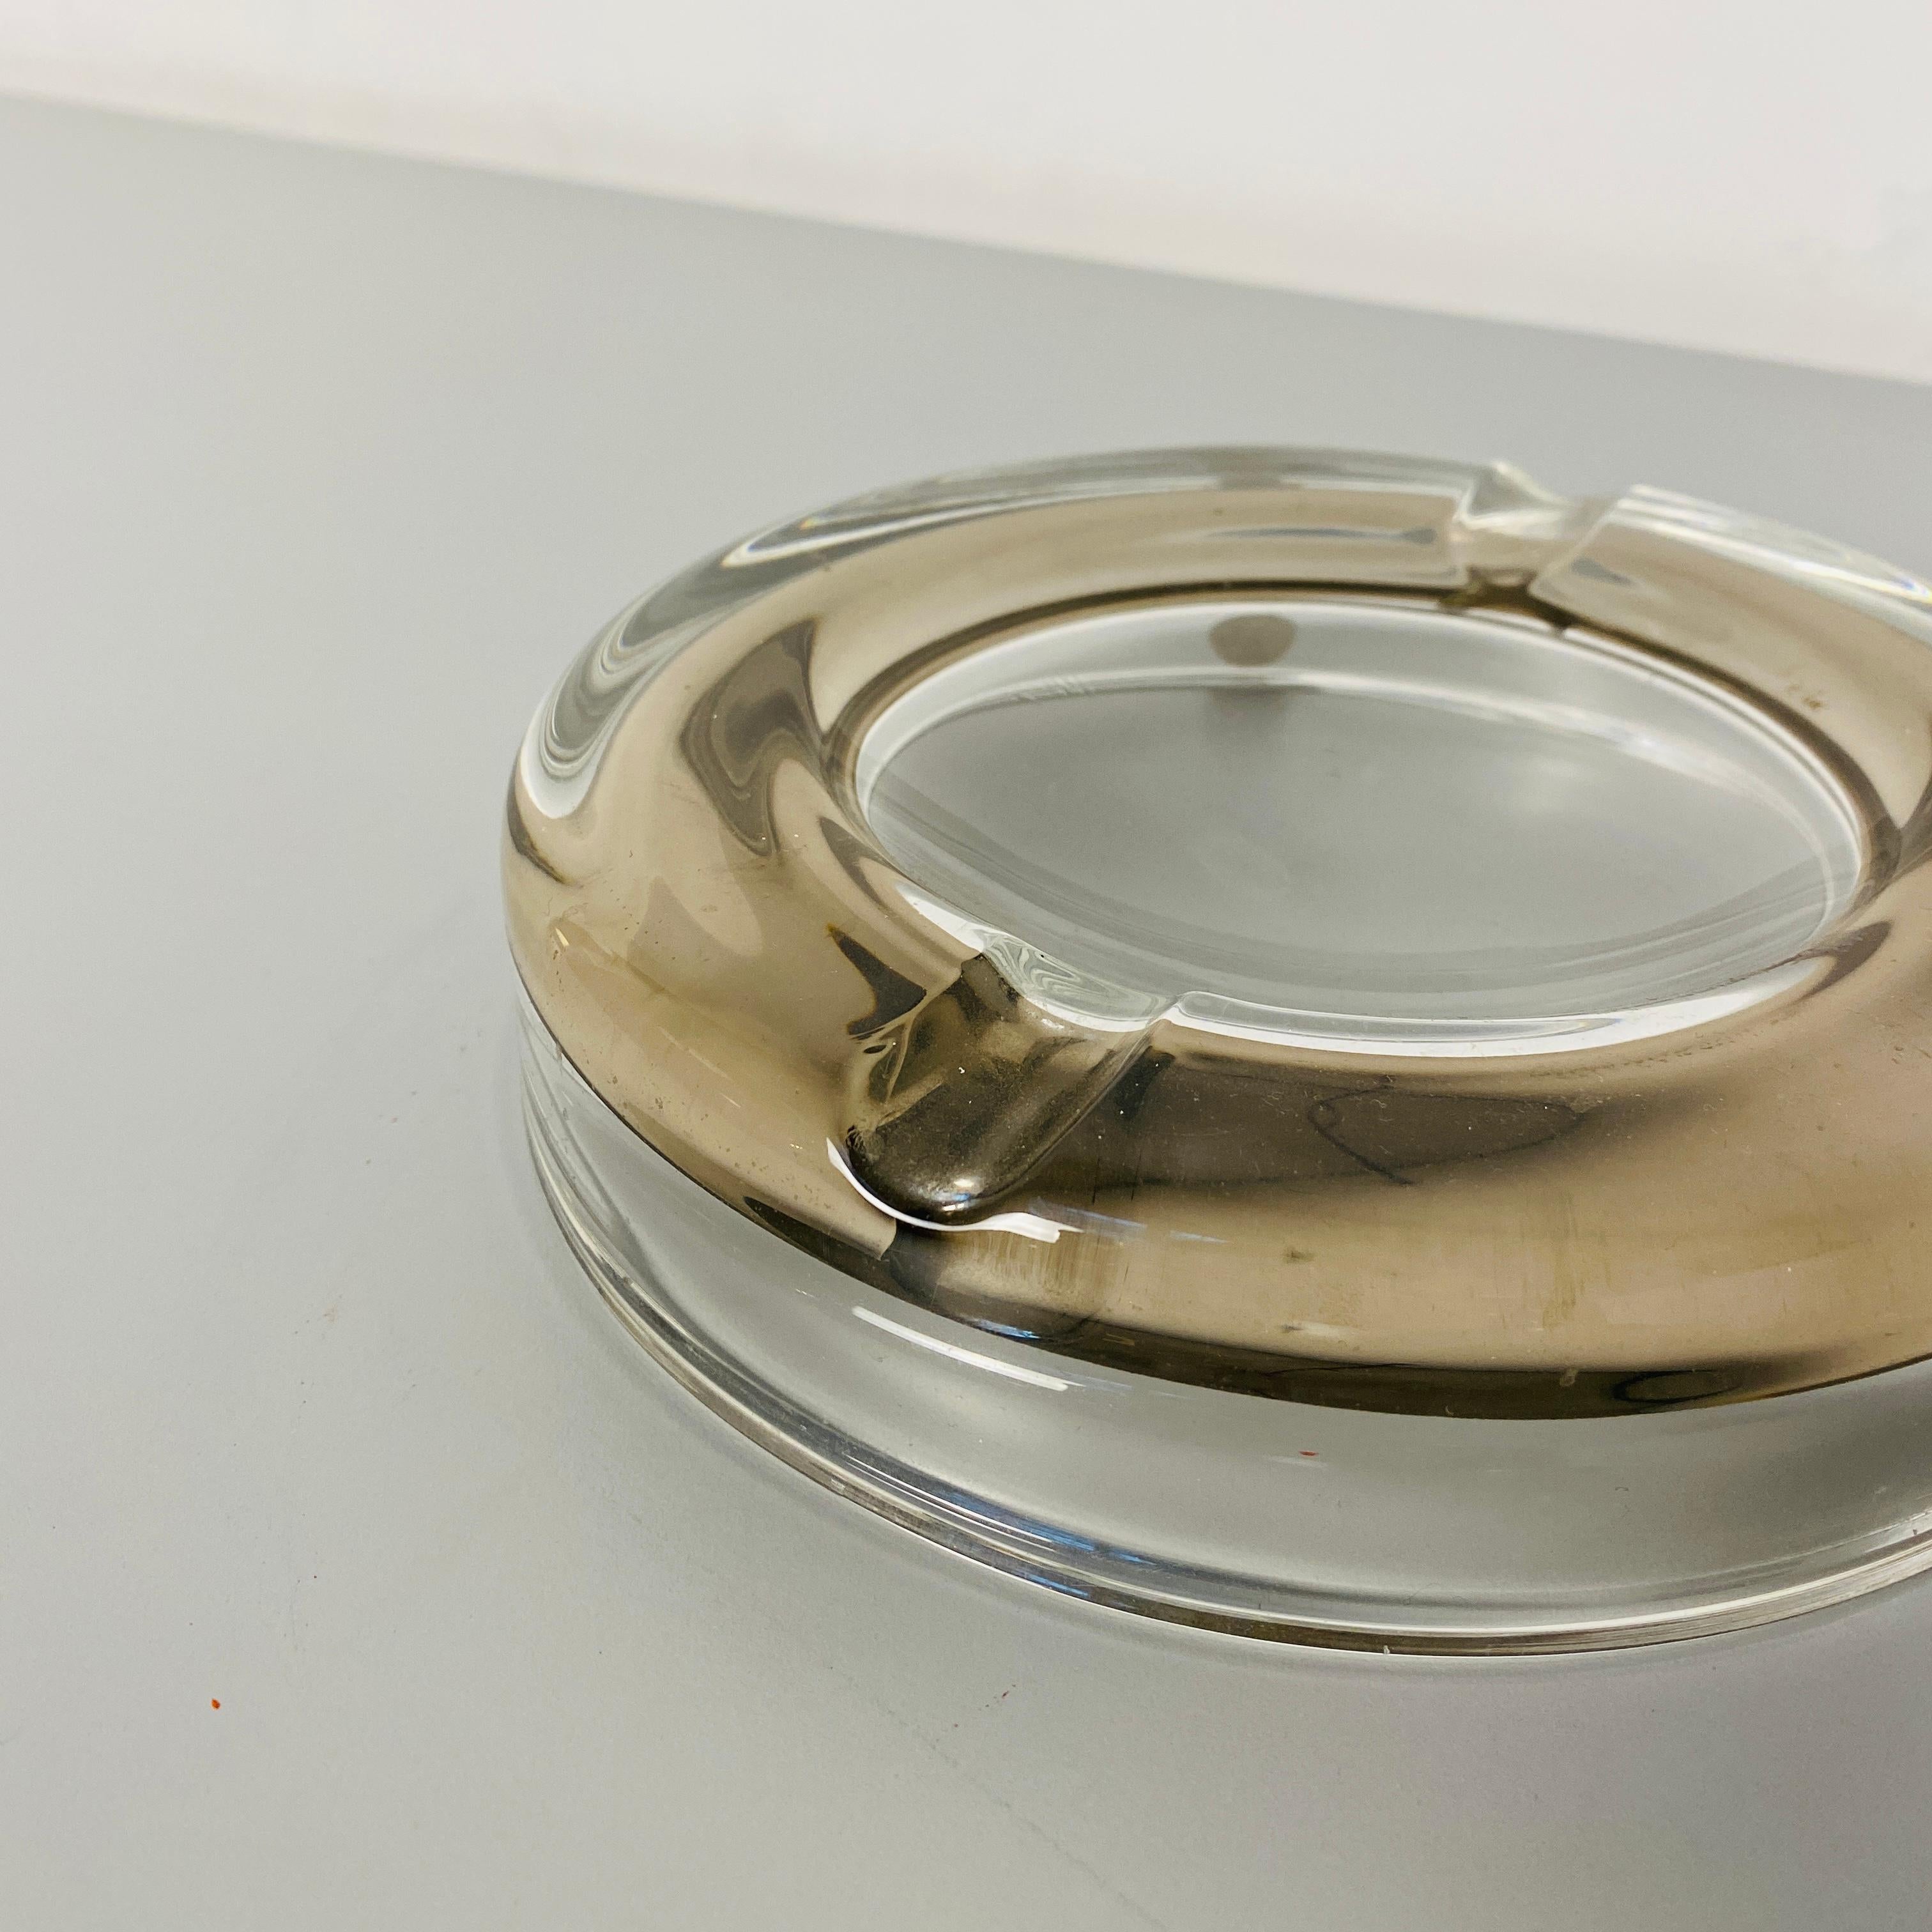 Italian Mid-Century Modern Glass Ashtray with Internal Decoration, 1970s For Sale 3